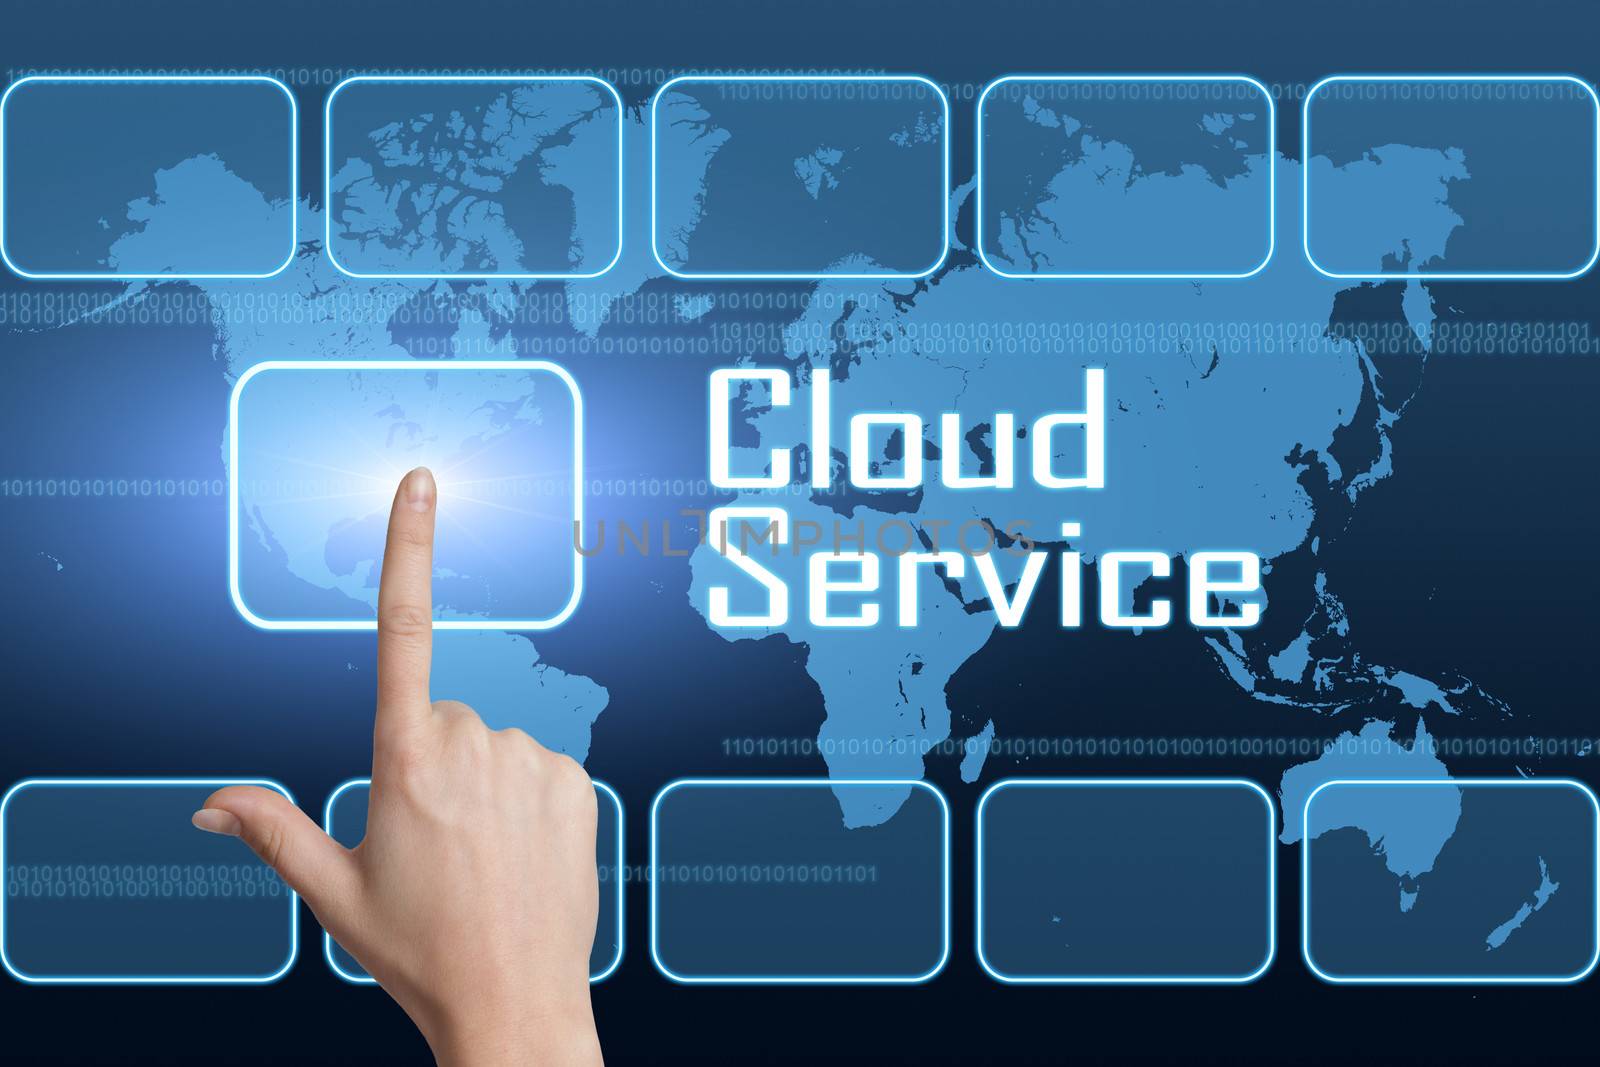 Cloud Service concept with interface and world map on blue background